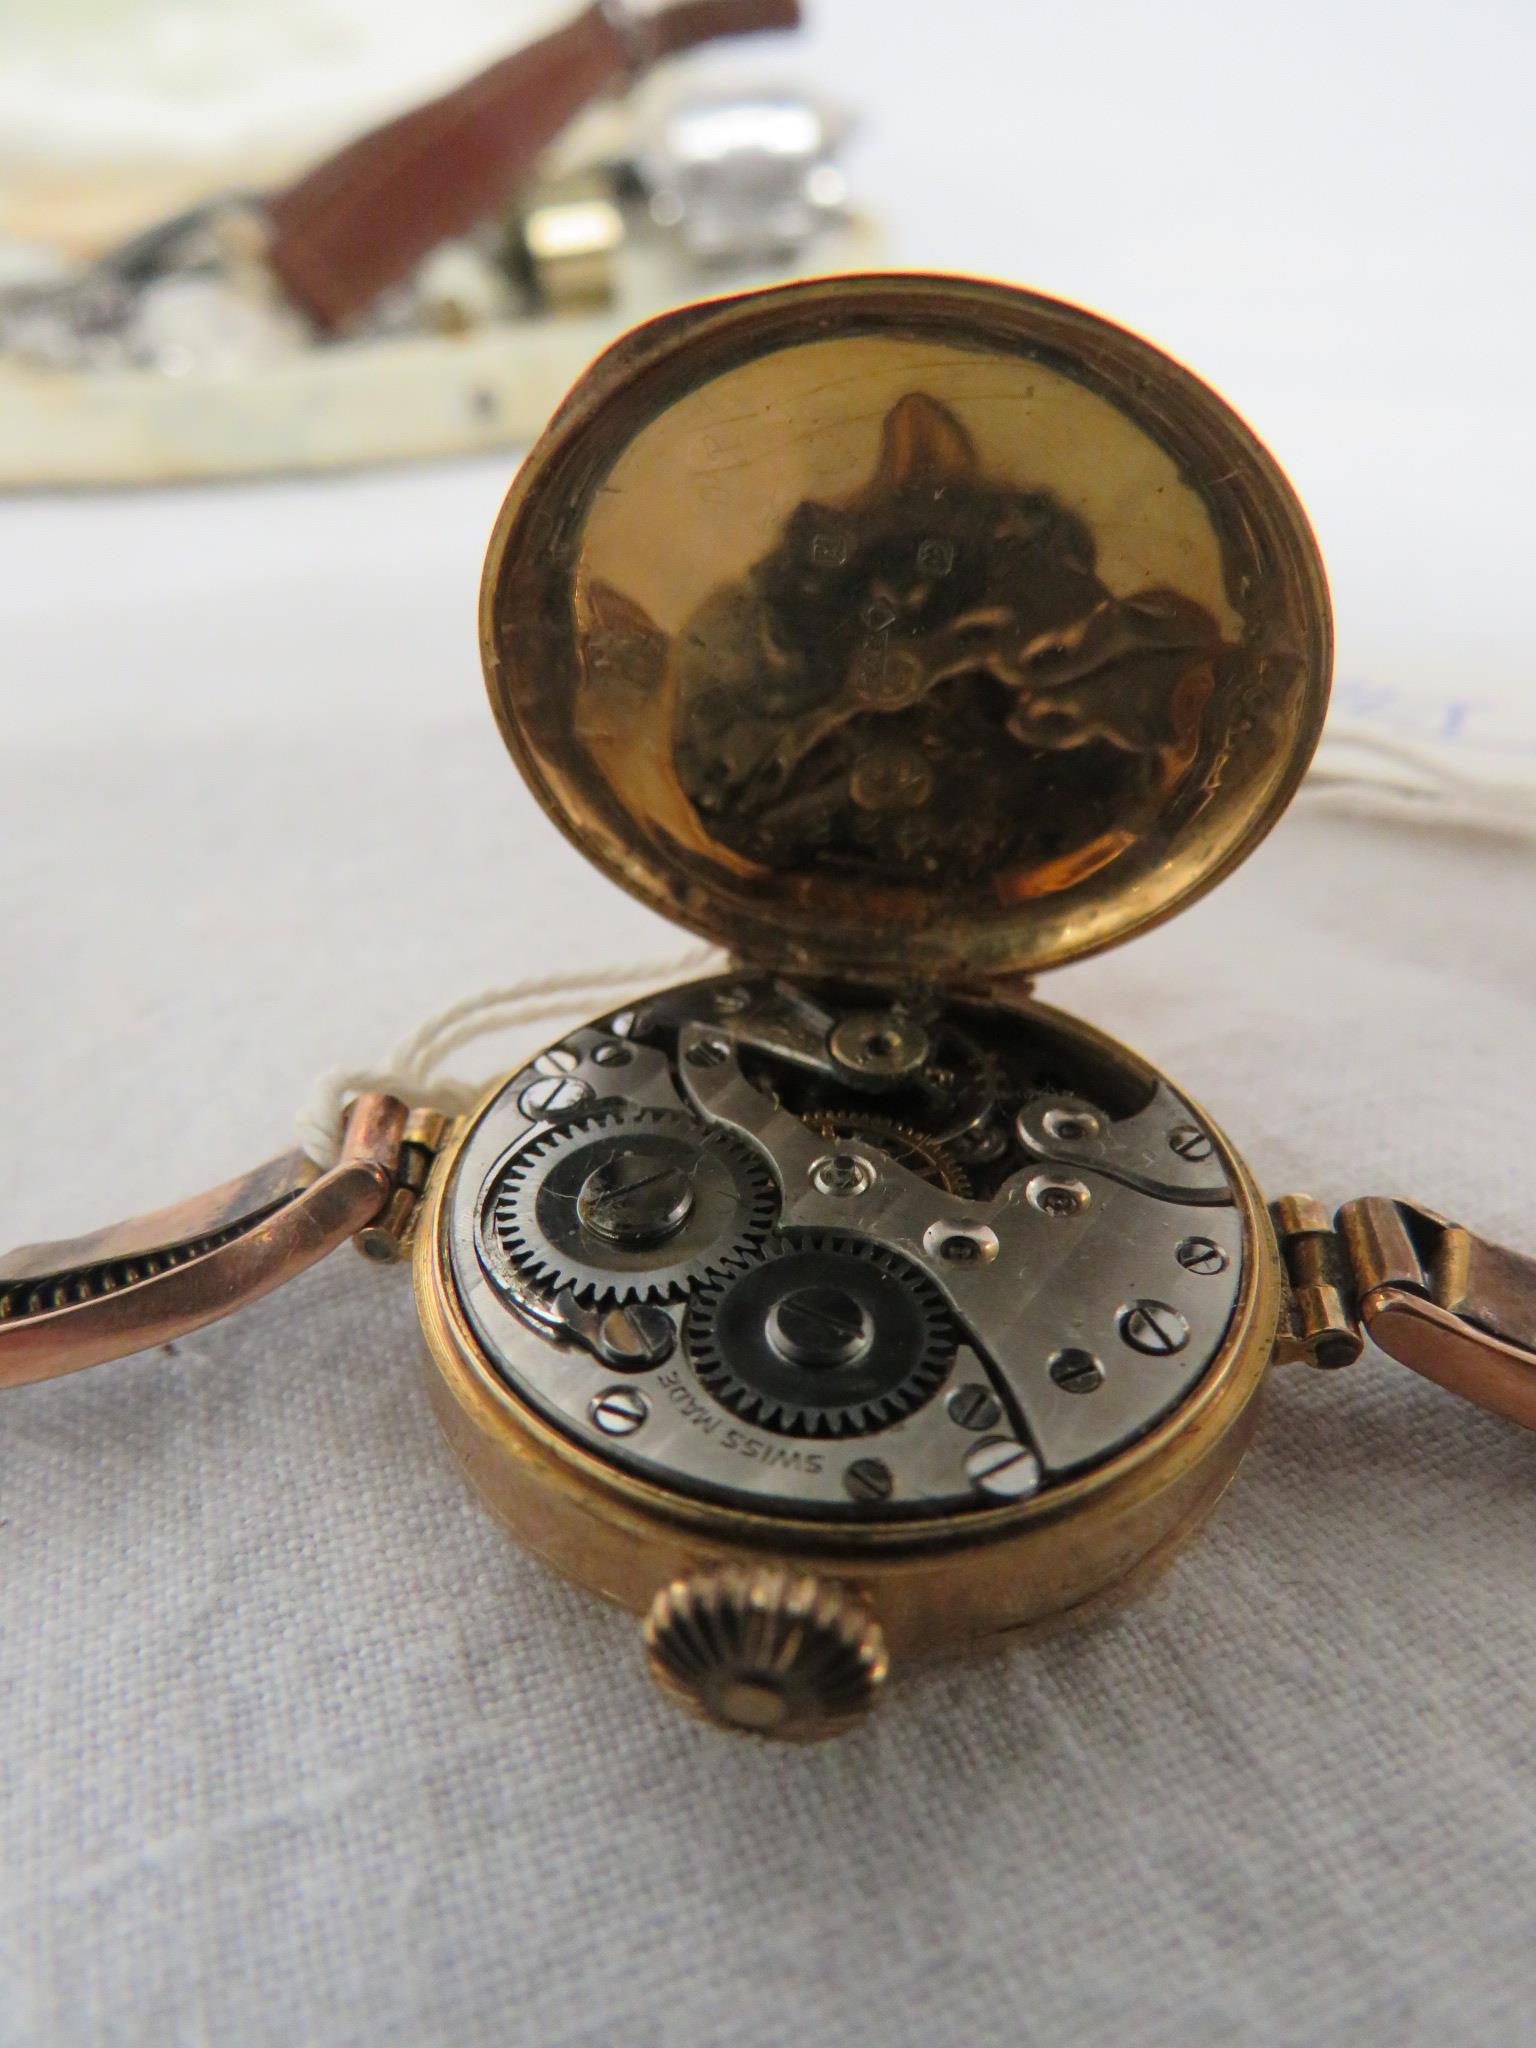 FOUR LADIES WRIST WATCHES INCLUDING ONE 9 CARAT GOLD CASED MECHANICAL WATCH TOGETHER WITH A FORTIS - Image 3 of 3